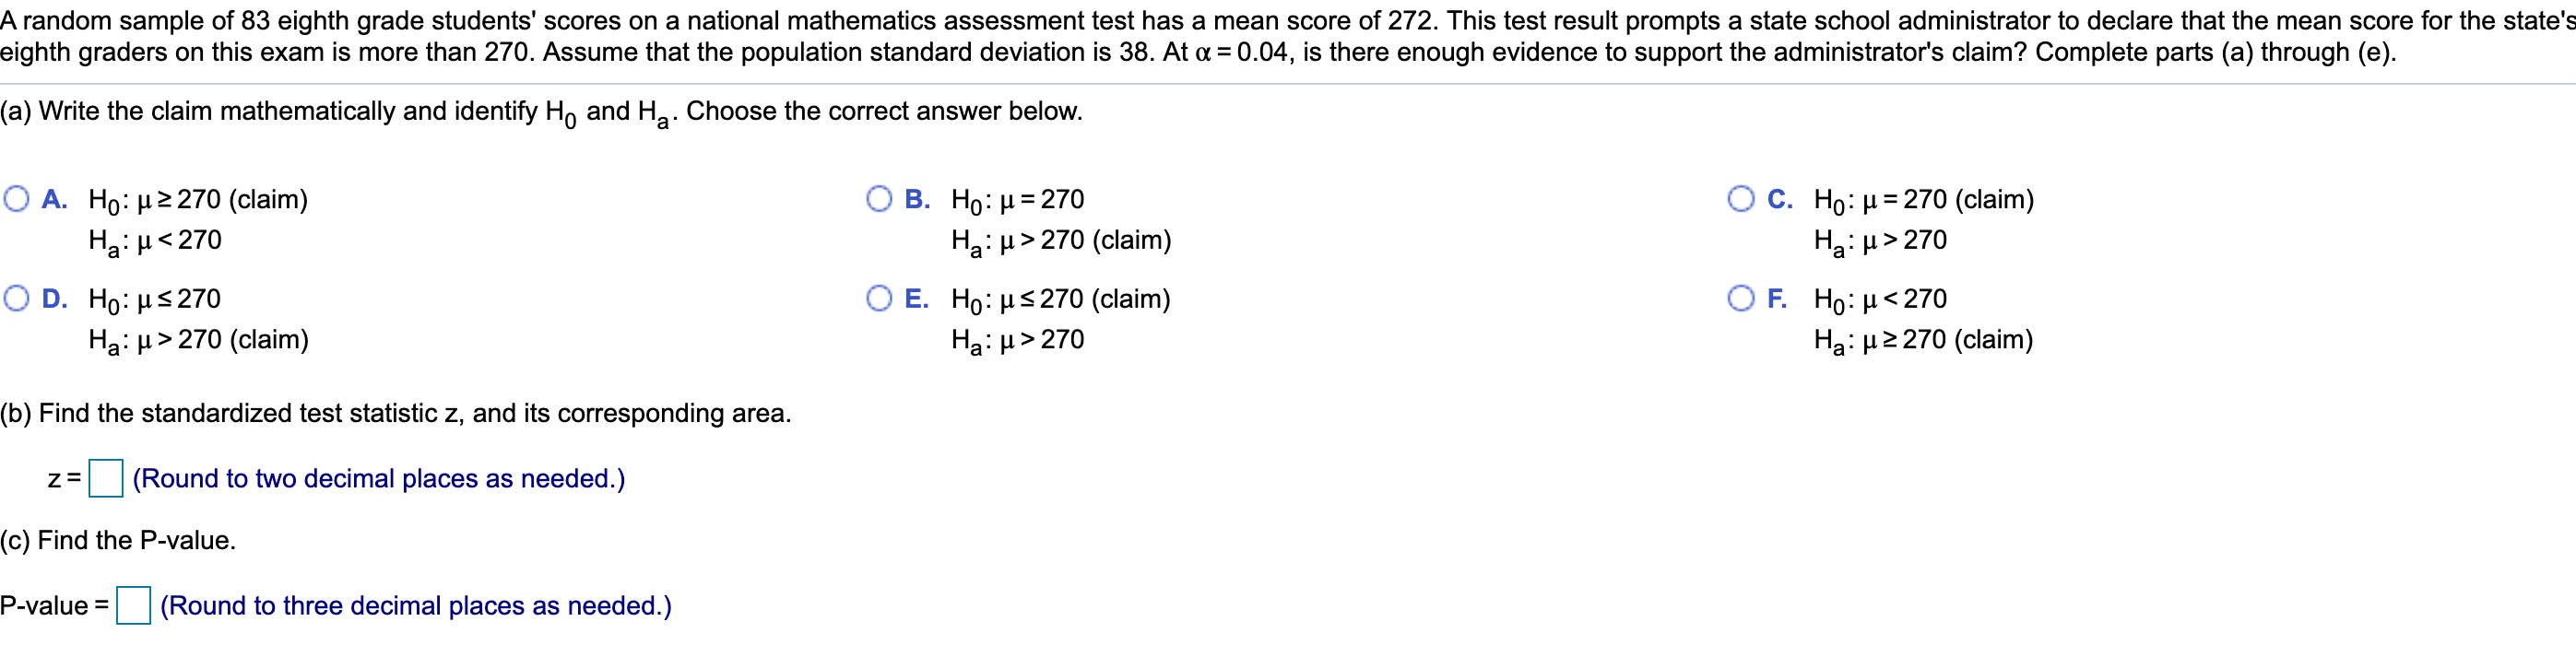 A random sample of 83 eighth grade students' scores on a national mathematics assessment test has a mean score of 272. This test result prompts a state school administrator to declare that the mean score for the state's
eighth graders on this exam is more than 270. Assume that the population standard deviation is 38. At a = 0.04, is there enough evidence to support the administrator's claim? Complete parts (a) through (e).
(a) Write the claim mathematically and identify H, and Ha. Choose the correct answer below.
Ο Α. Ho: μ2 270 (claim)
Ha: H<270
O c. Ho: µ= 270 (claim)
Ha:µ> 270
B. Ho: µ= 270
Ha: µ> 270 (claim)
Ο D . Ho: μS 270
E. Ho : με 270 (claim)
Ο F. Ho: μ < 270
Ha: µ> 270 (claim)
Ha: H> 270
Ha: H2 270 (claim)
(b) Find the standardized test statistic z, and its corresponding area.
(Round to two decimal places as needed.)
(c) Find the P-value.
P-value =
(Round to three decimal places as needed.)
